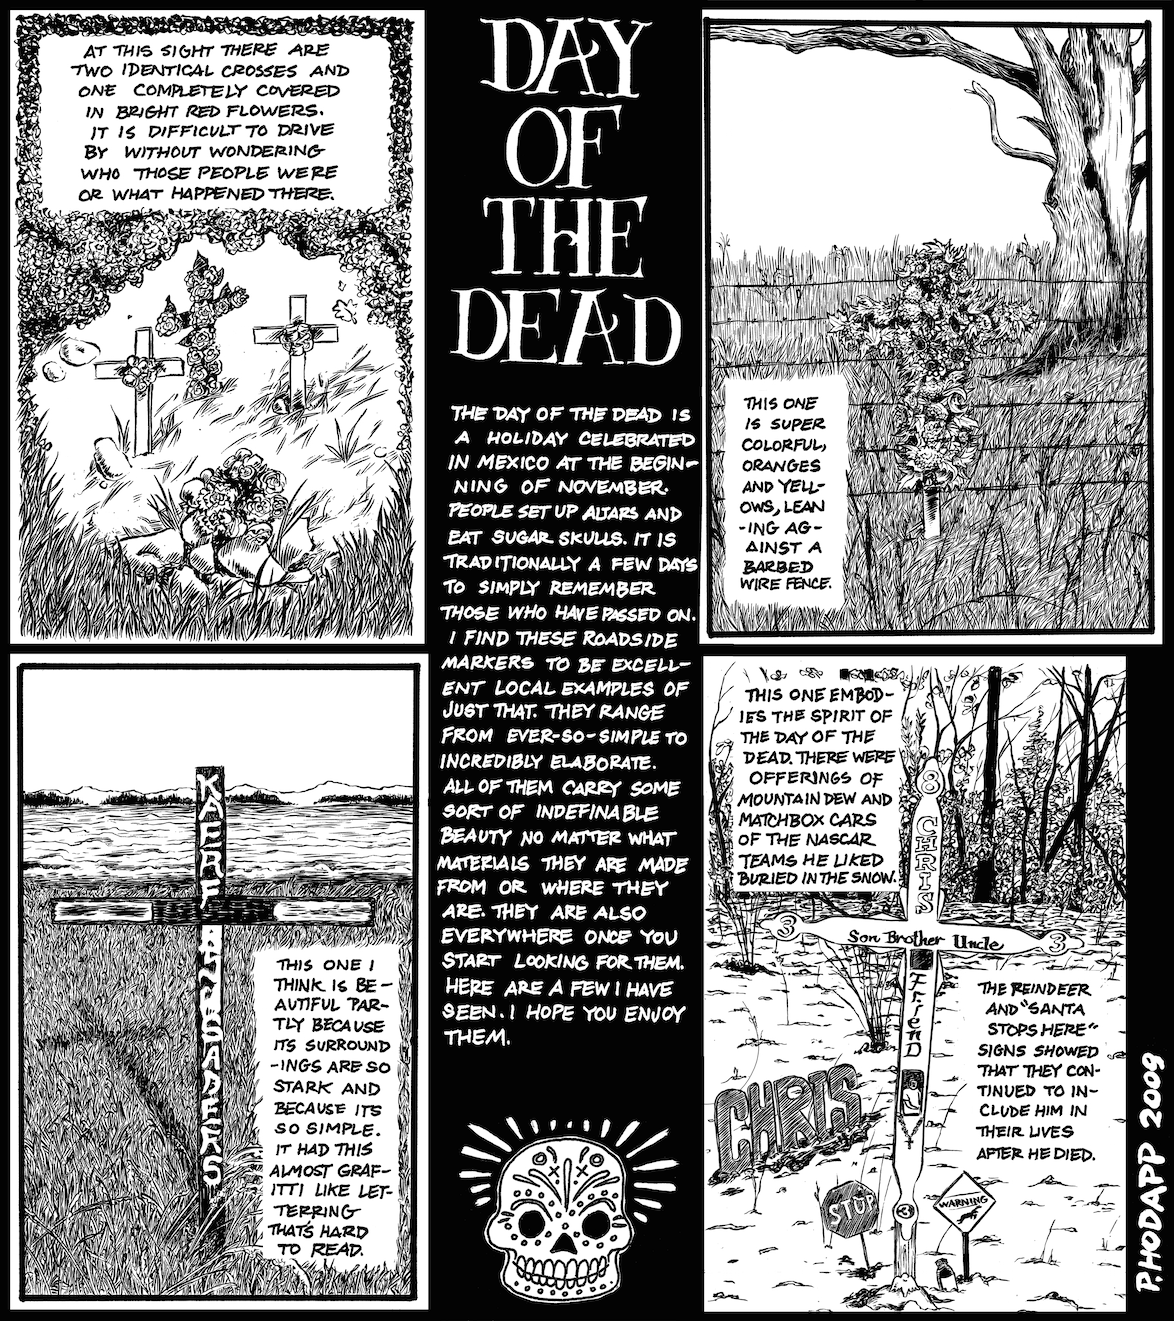 Day of the dead piece on road-side altars for the dead in rural Wisconsin.